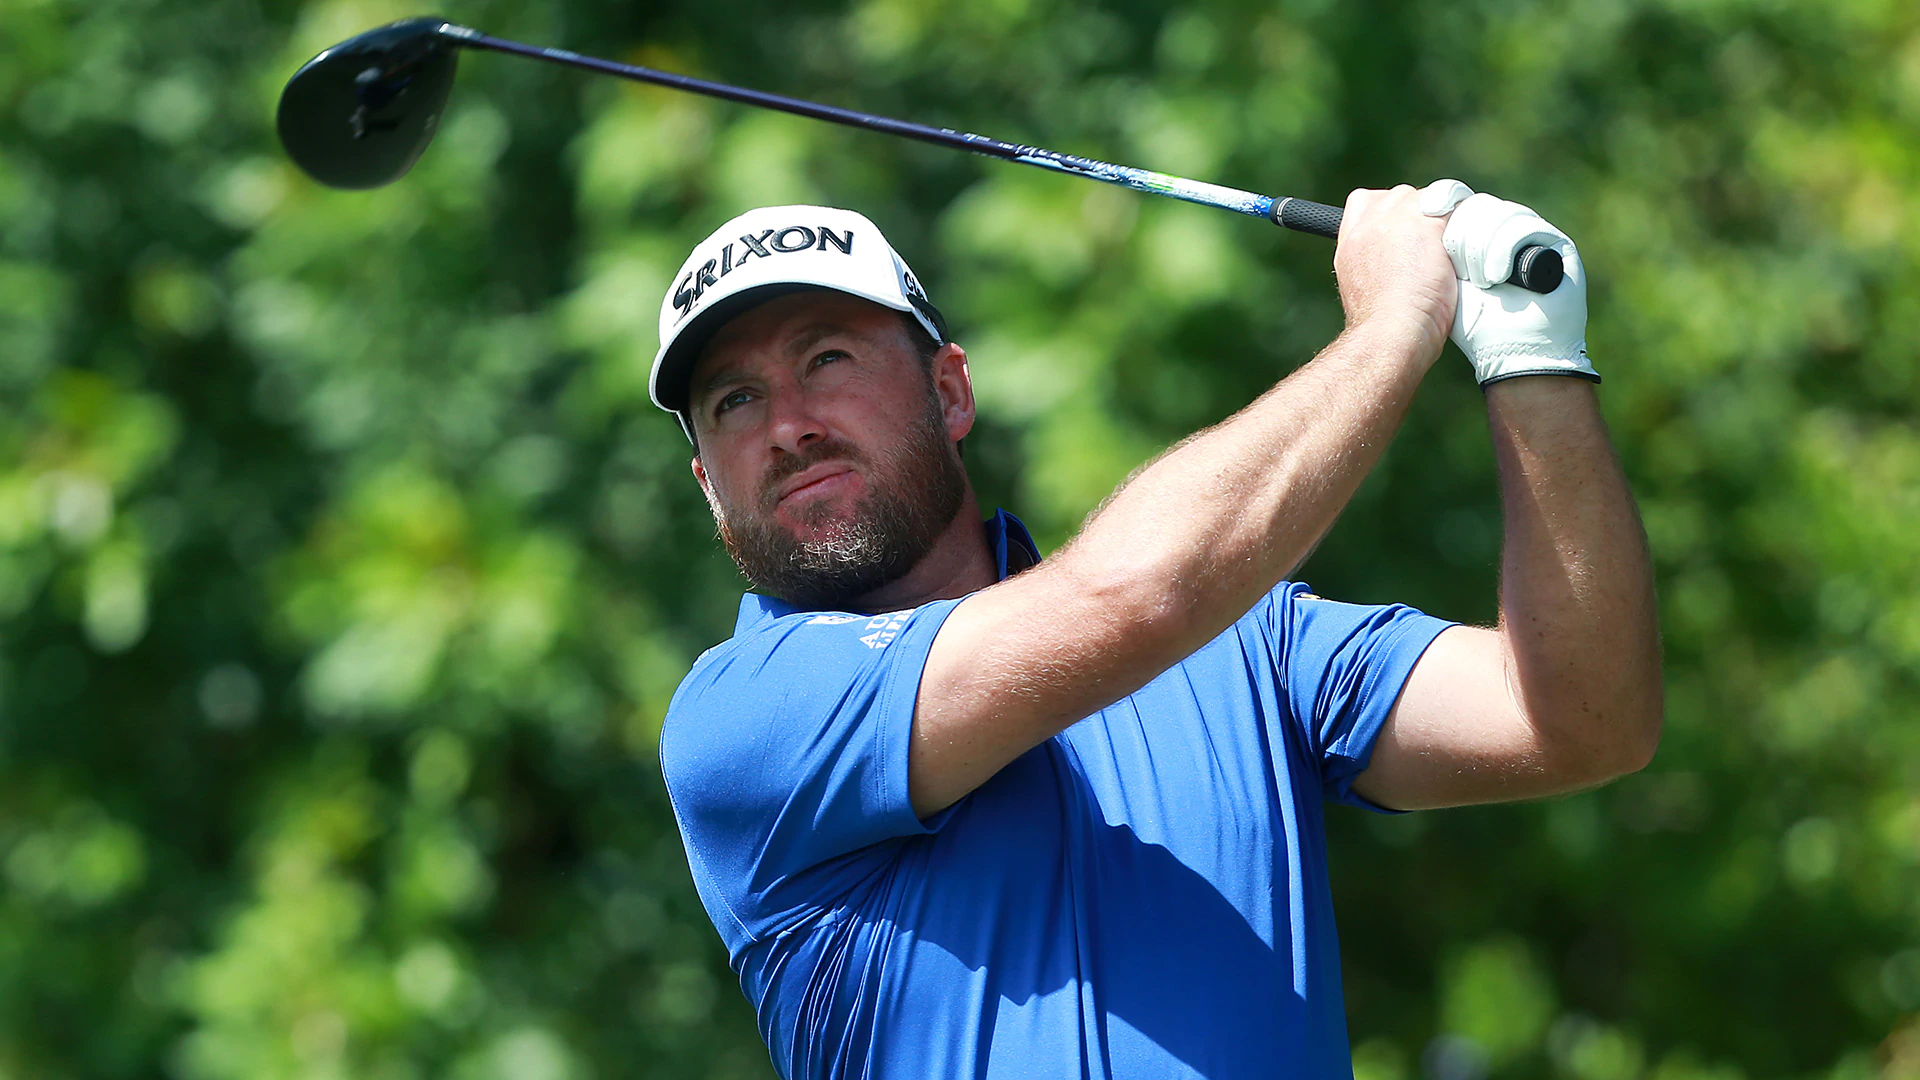 McDowell motivated to punch ticket to hometown Open